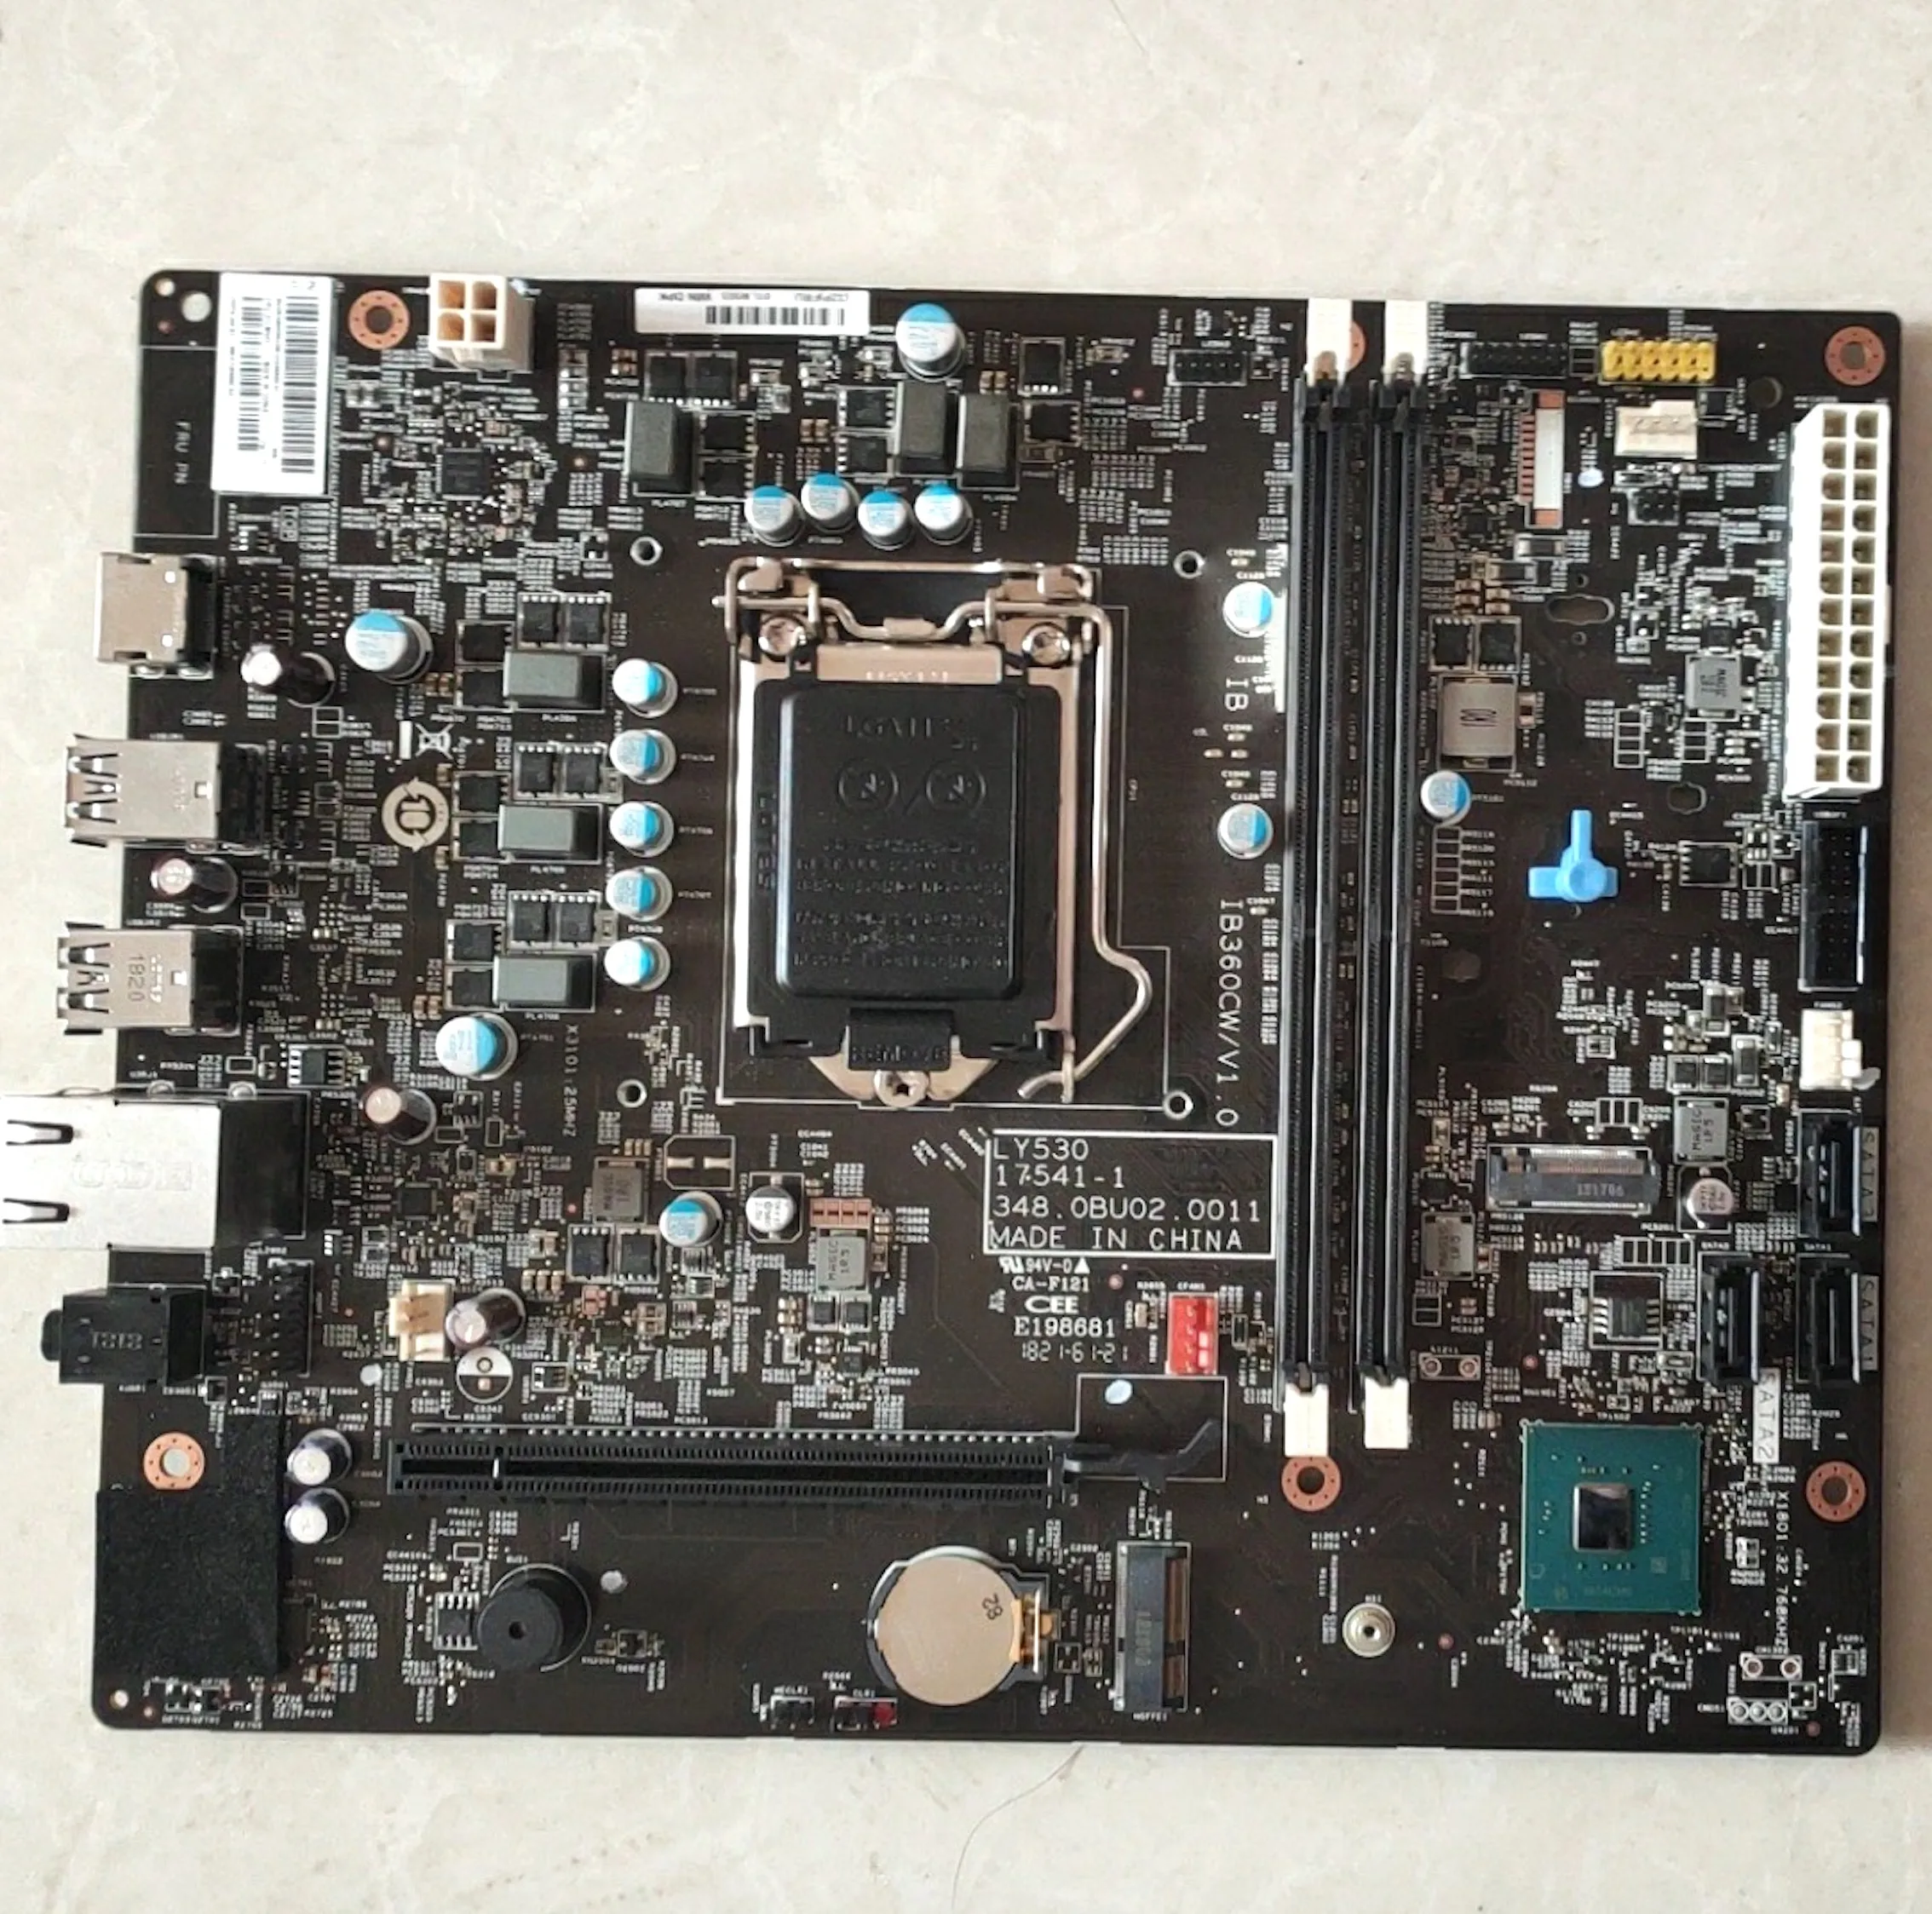 

For lenovo 7000 7000-28ICBR Motherboard IB360CW LY530 17541-1 348.0BU02.0011 Mainboard 100%tested fully work